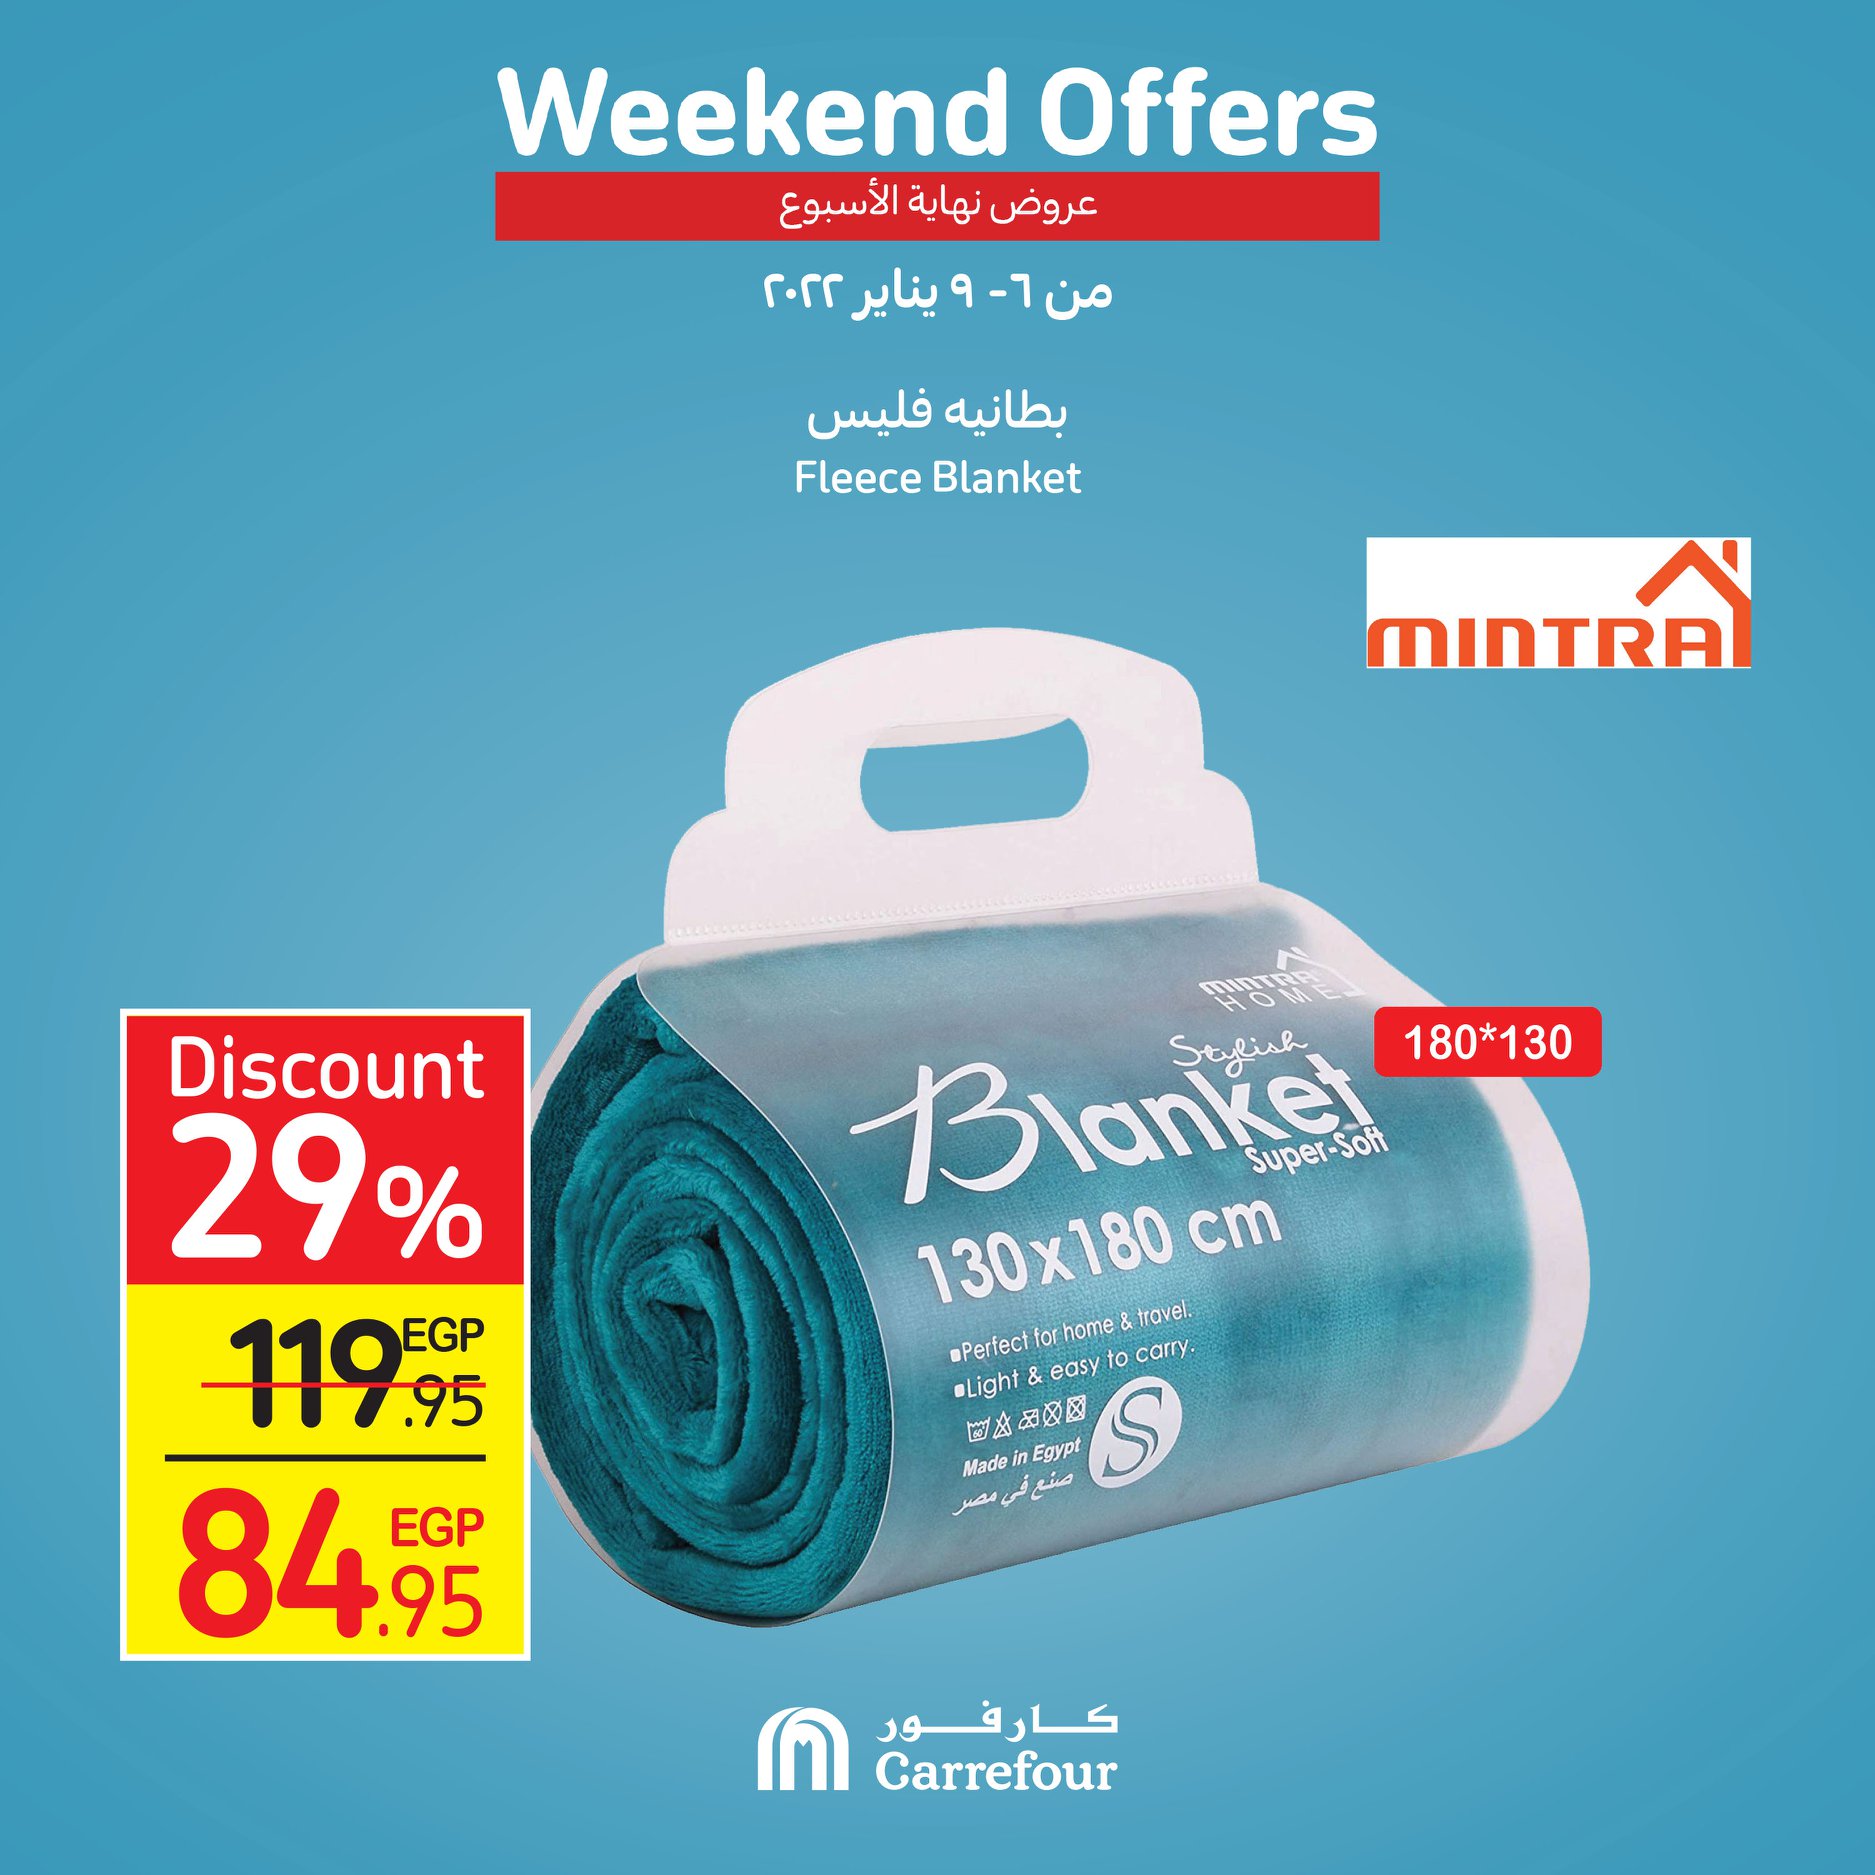 Now, the strongest offers and surprises from Carrefour, half-price discounts, at Weekend until January 16th, 39